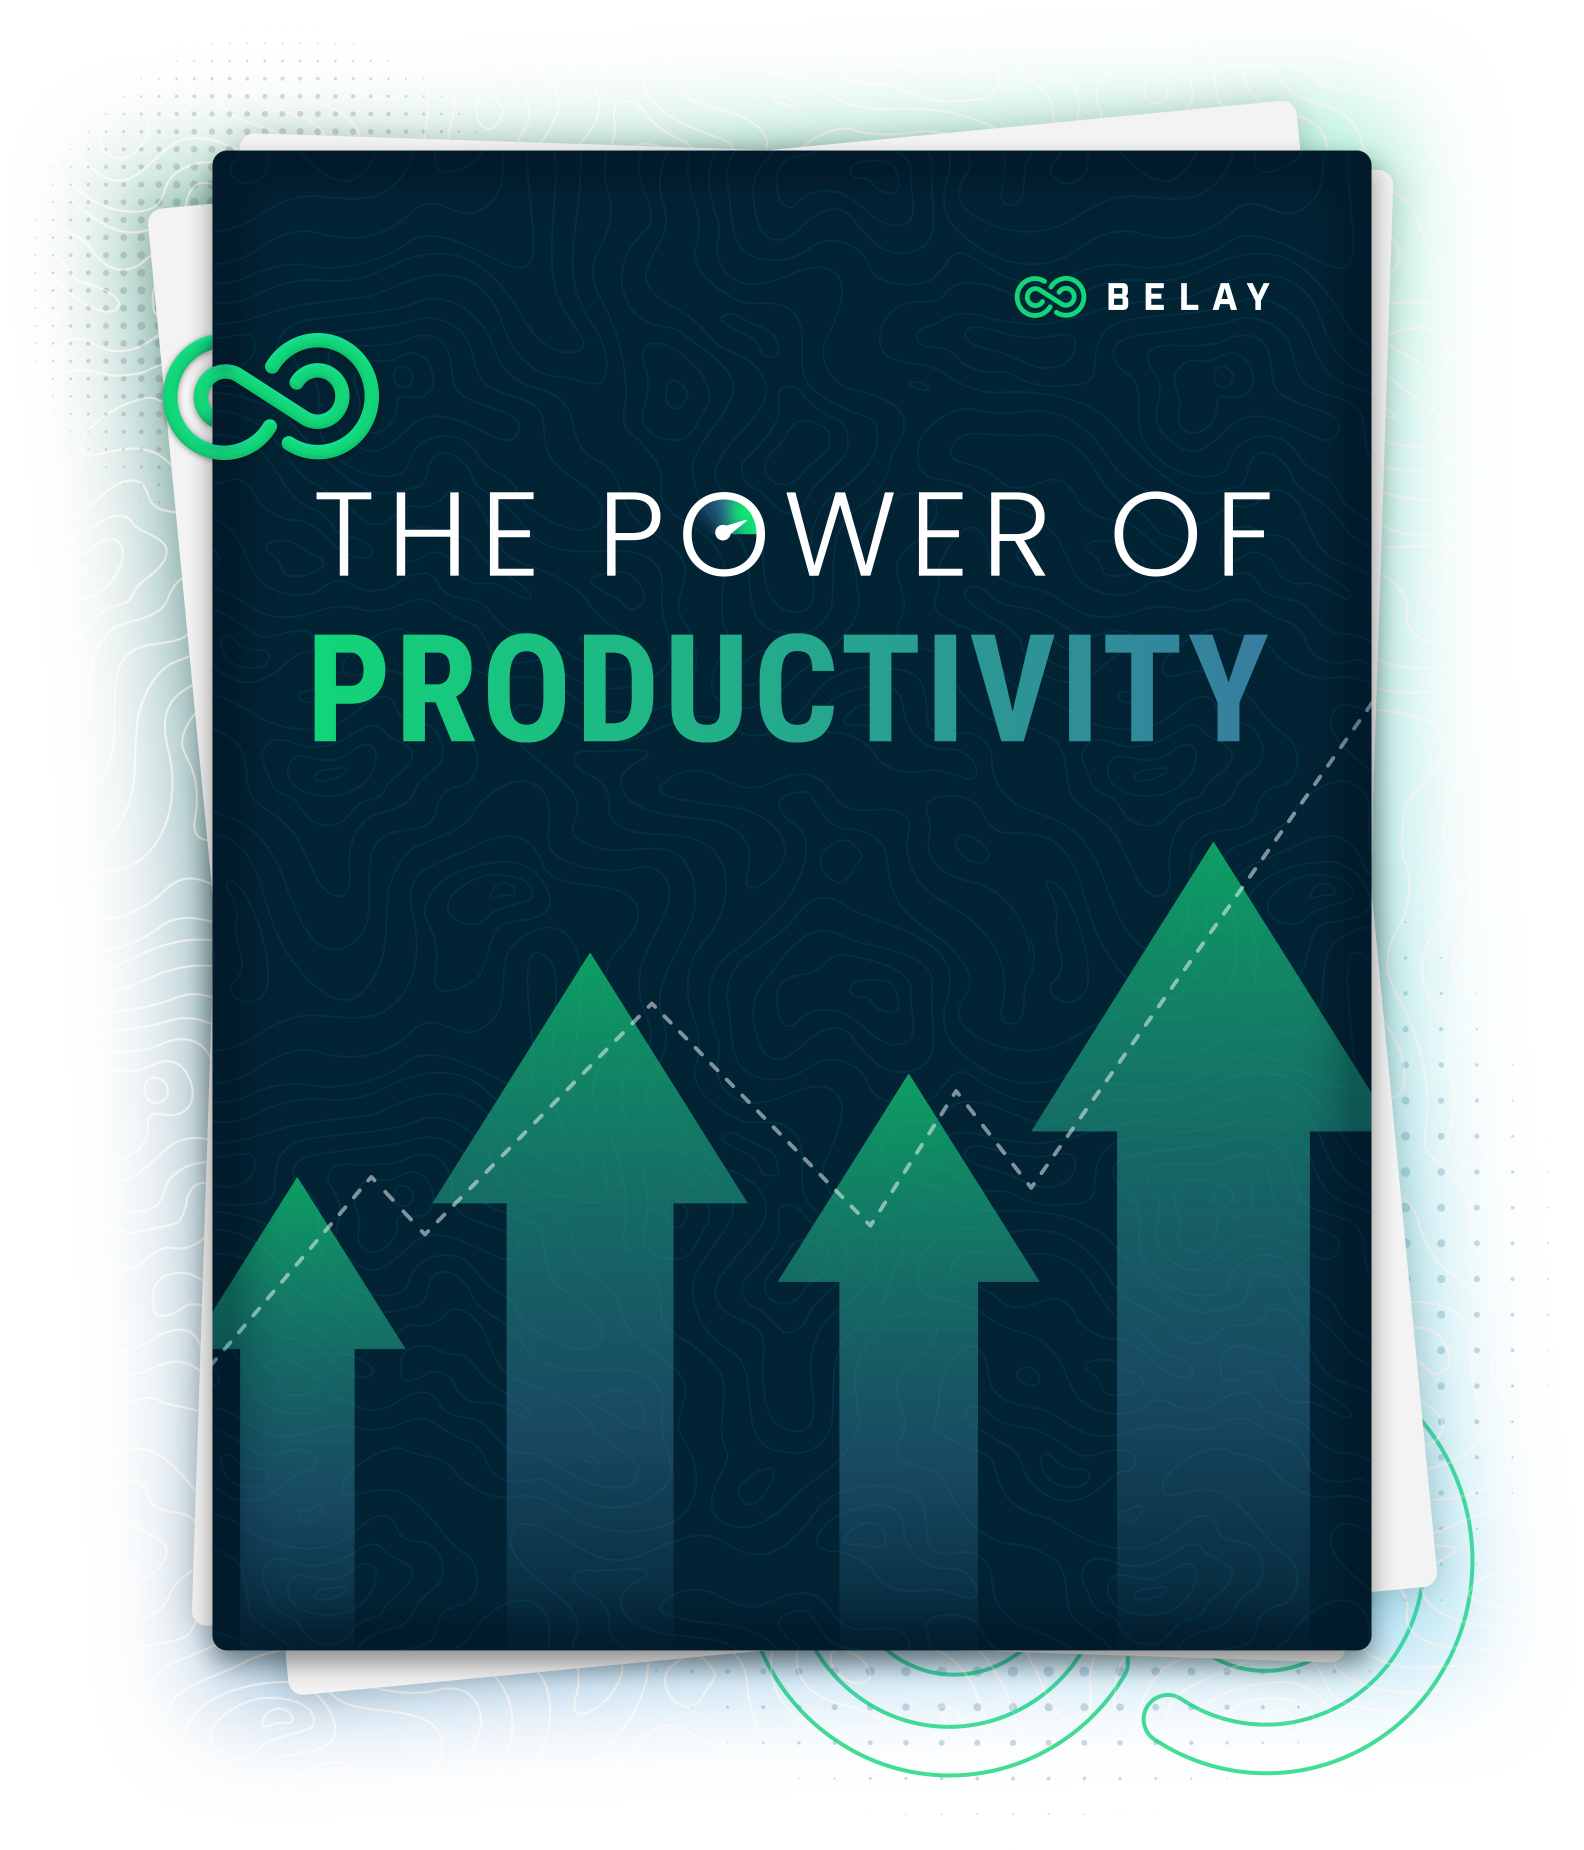 The Power of Productivity